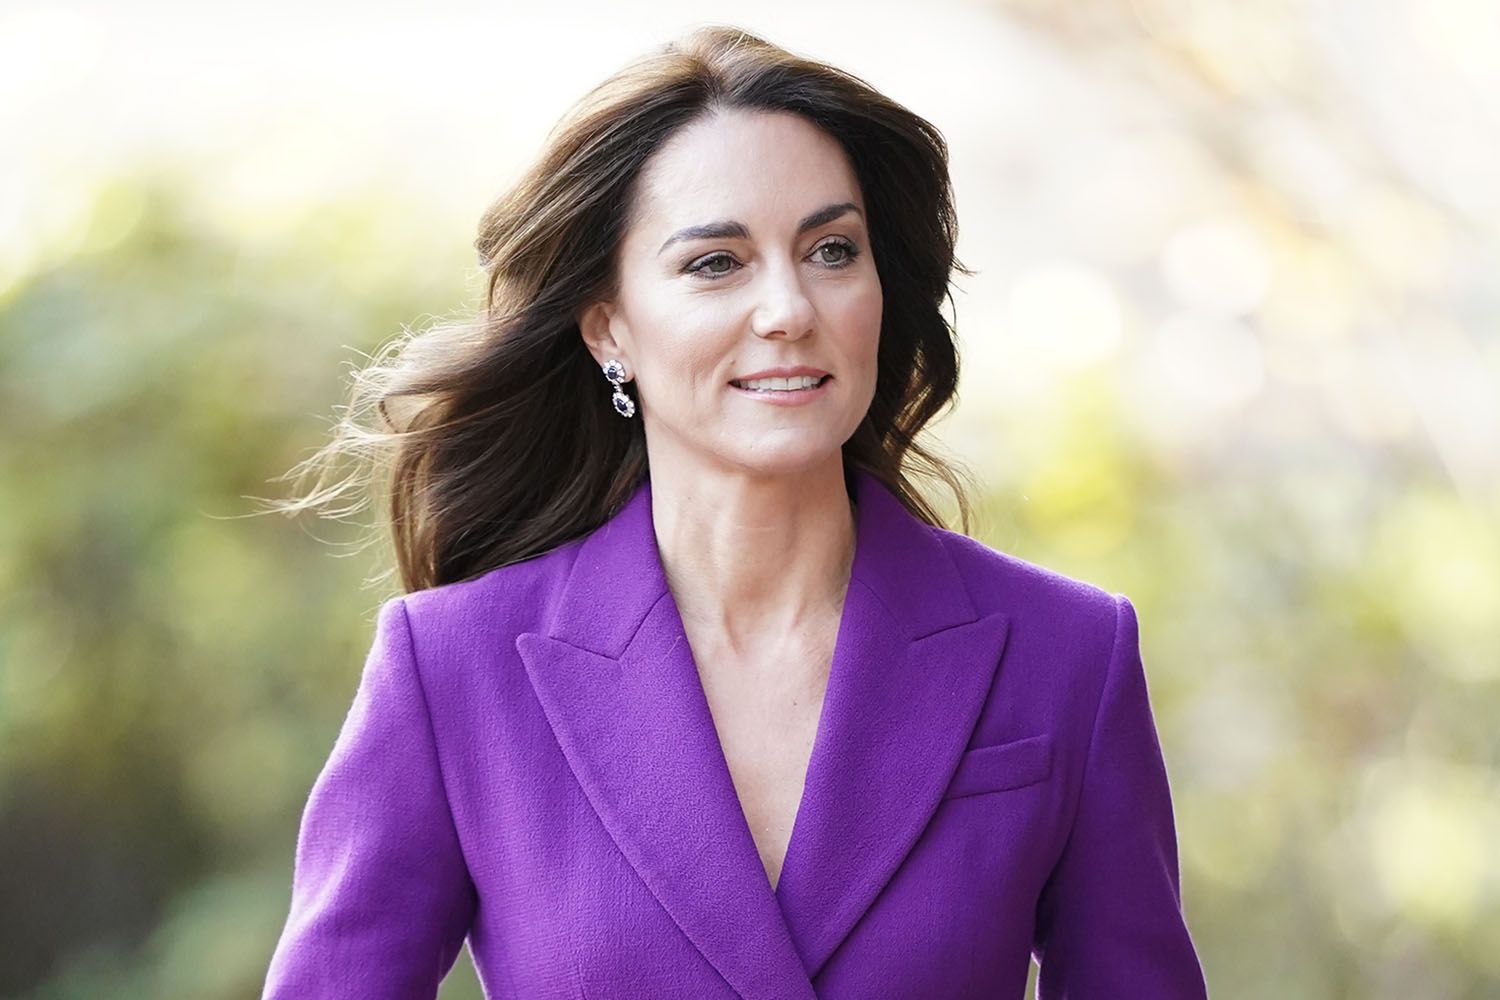 Kate Middleton Undergoes Successful Abdominal Surgery, To Remain Hospitalized For 2 Weeks